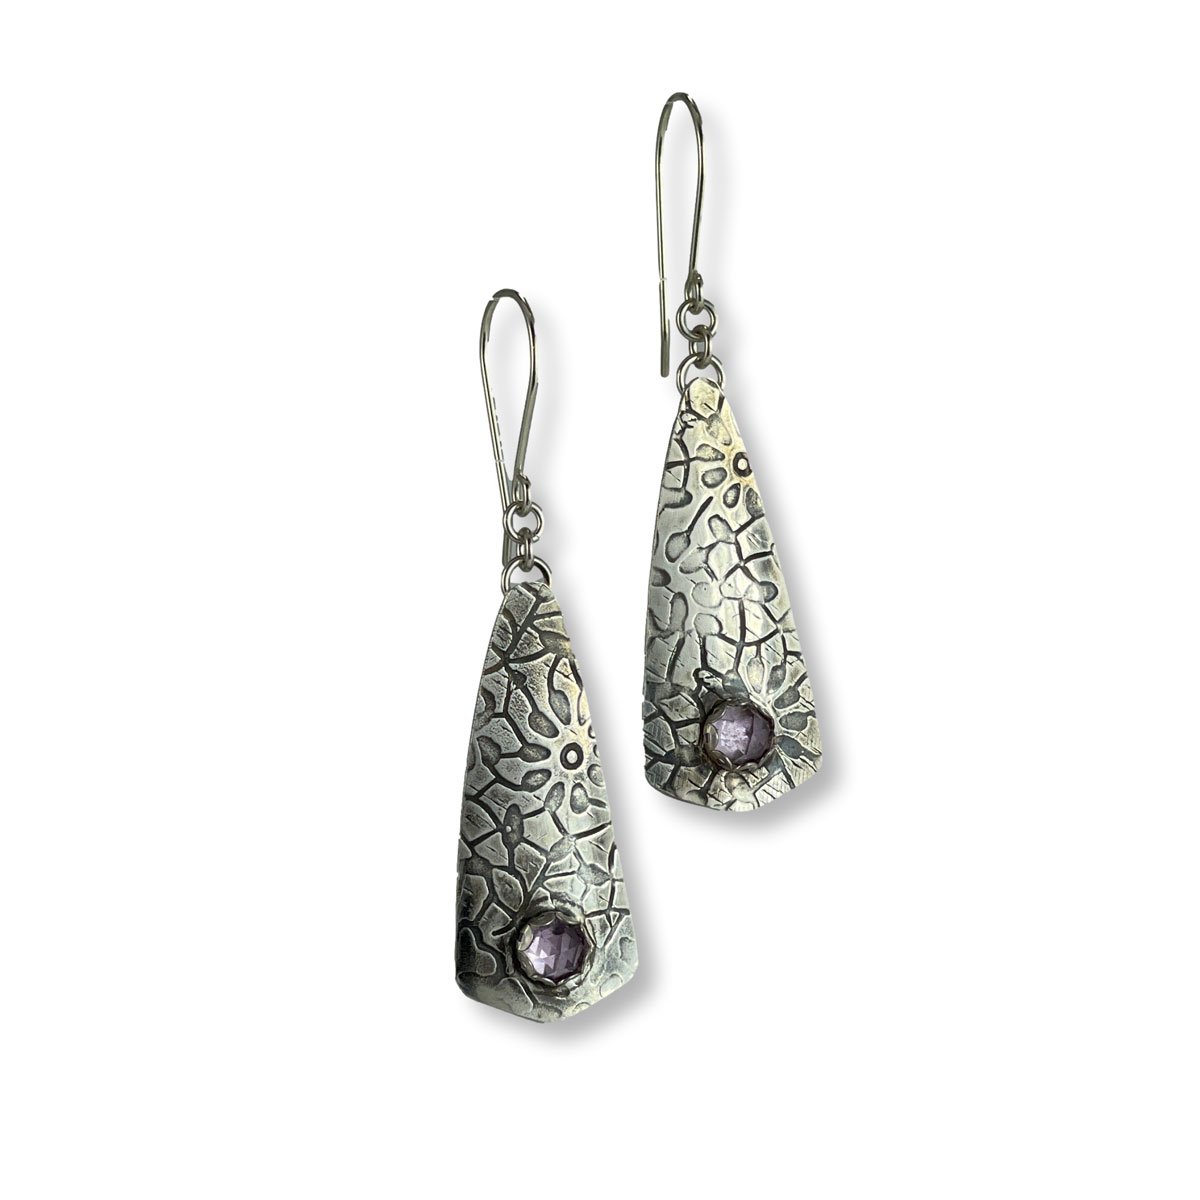 Textured Sterling Silver Spear Drop Earrings with Rose cut Amethyst